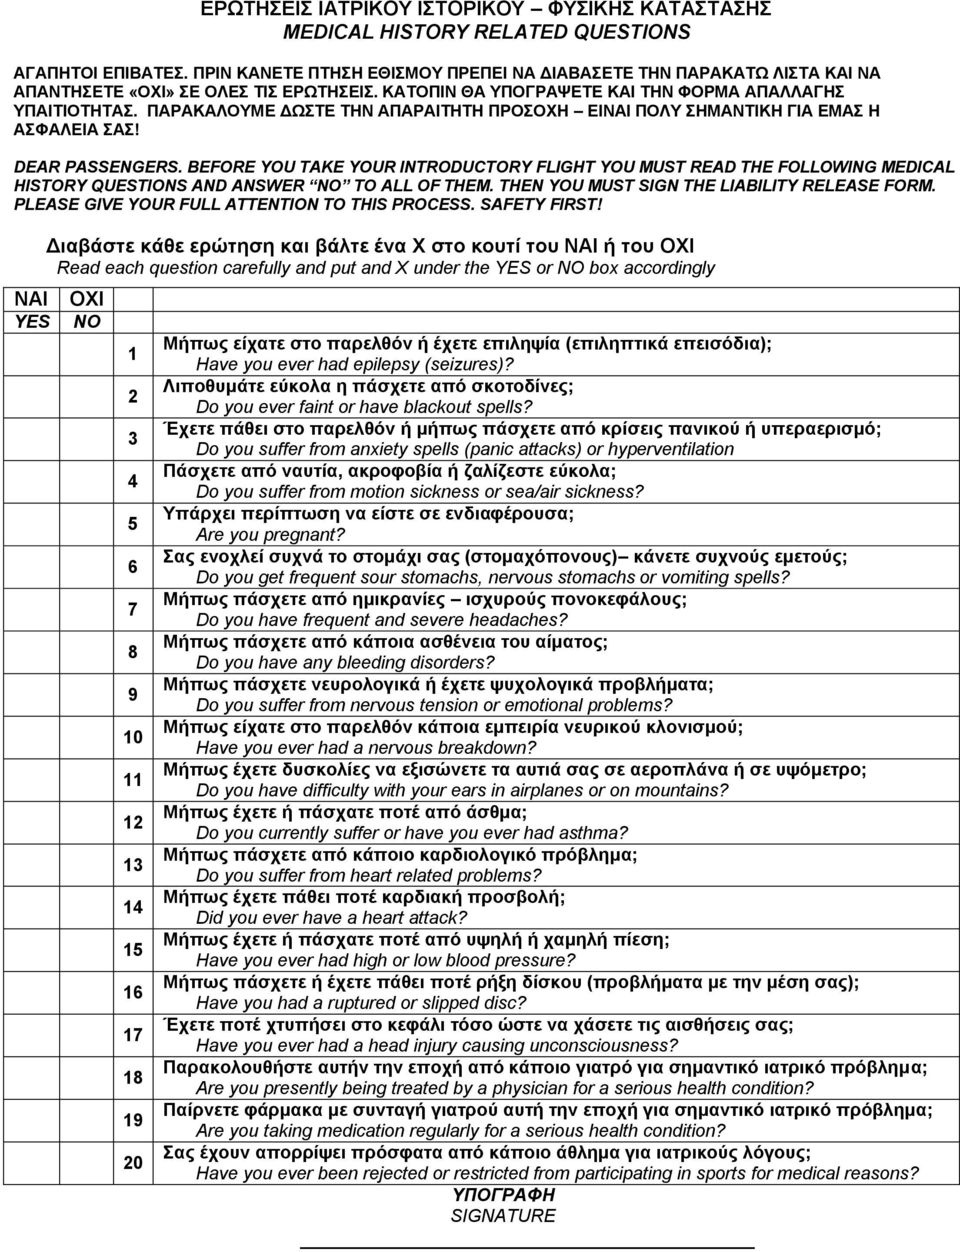 BEFORE YOU TAKE YOUR INTRODUCTORY FLIGHT YOU MUST READ THE FOLLOWING MEDICAL HISTORY QUESTIONS AND ANSWER NO TO ALL OF THEM. THEN YOU MUST SIGN THE LIABILITY RELEASE FORM.